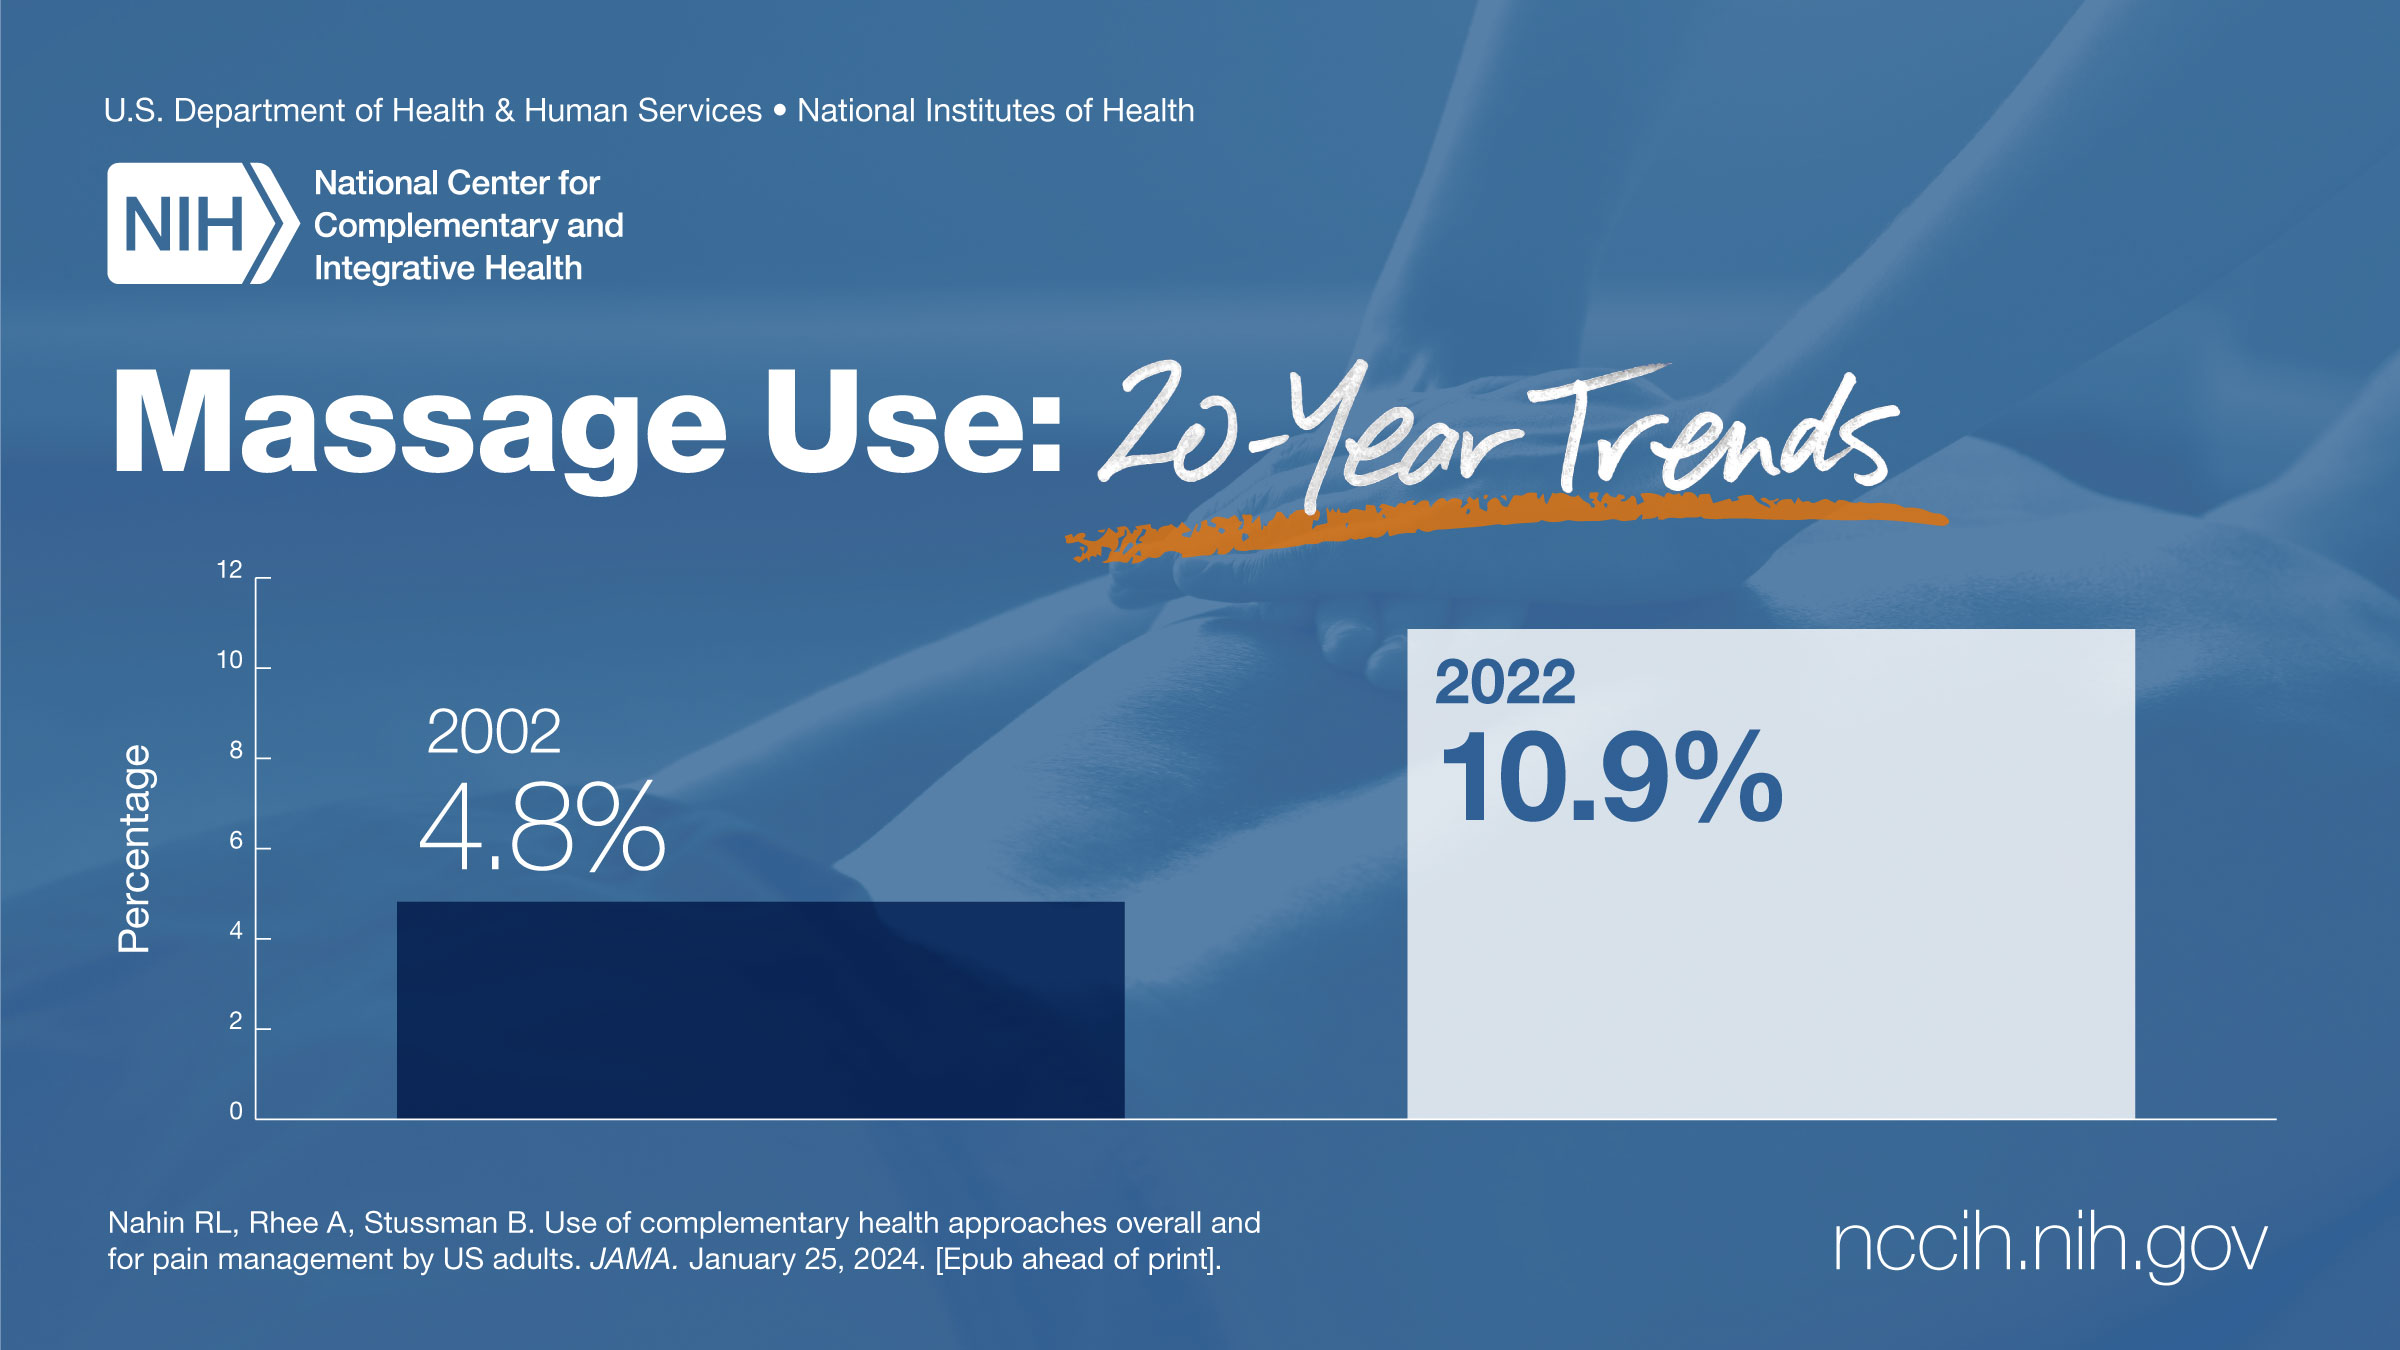 NHIS 20 Year Trends: Use of Massage